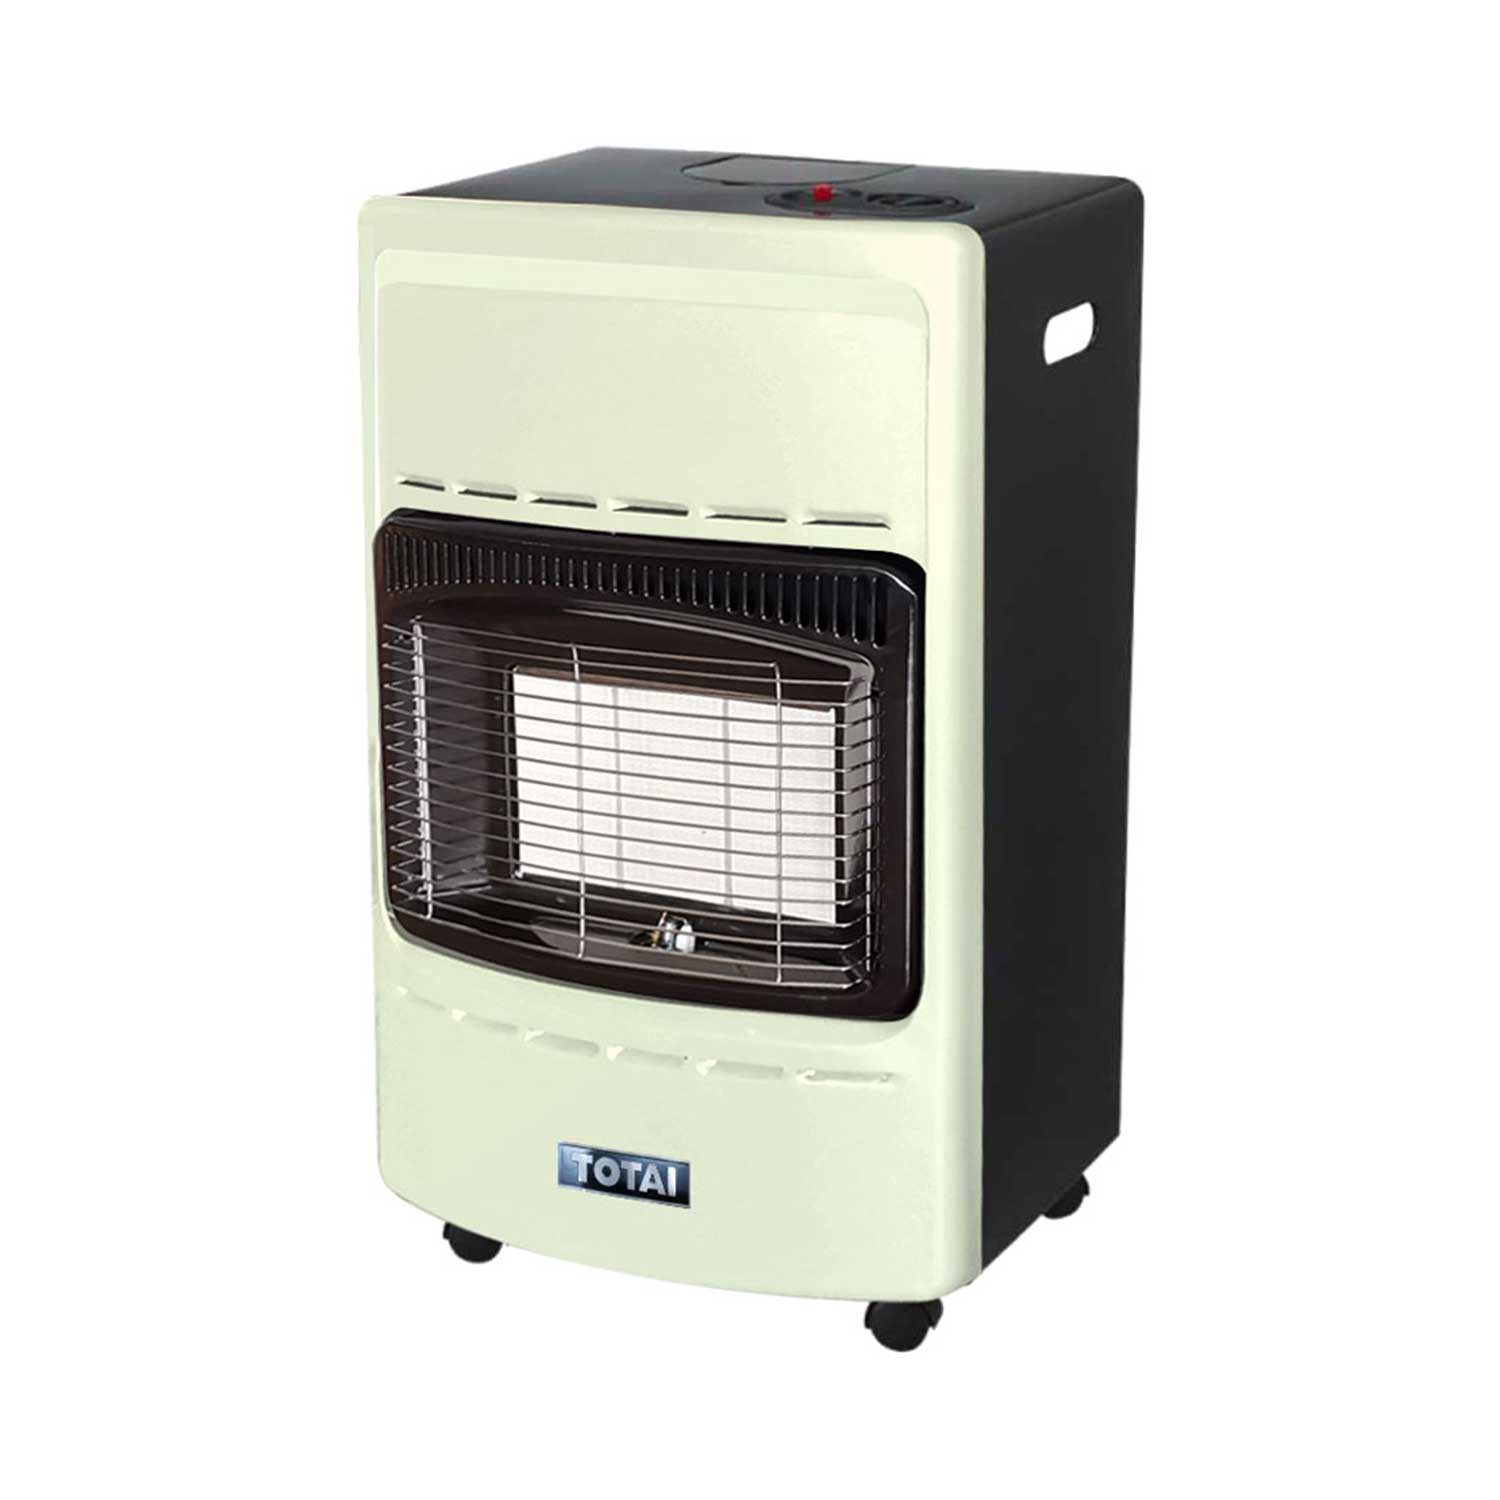 Totai Rollabout Heater